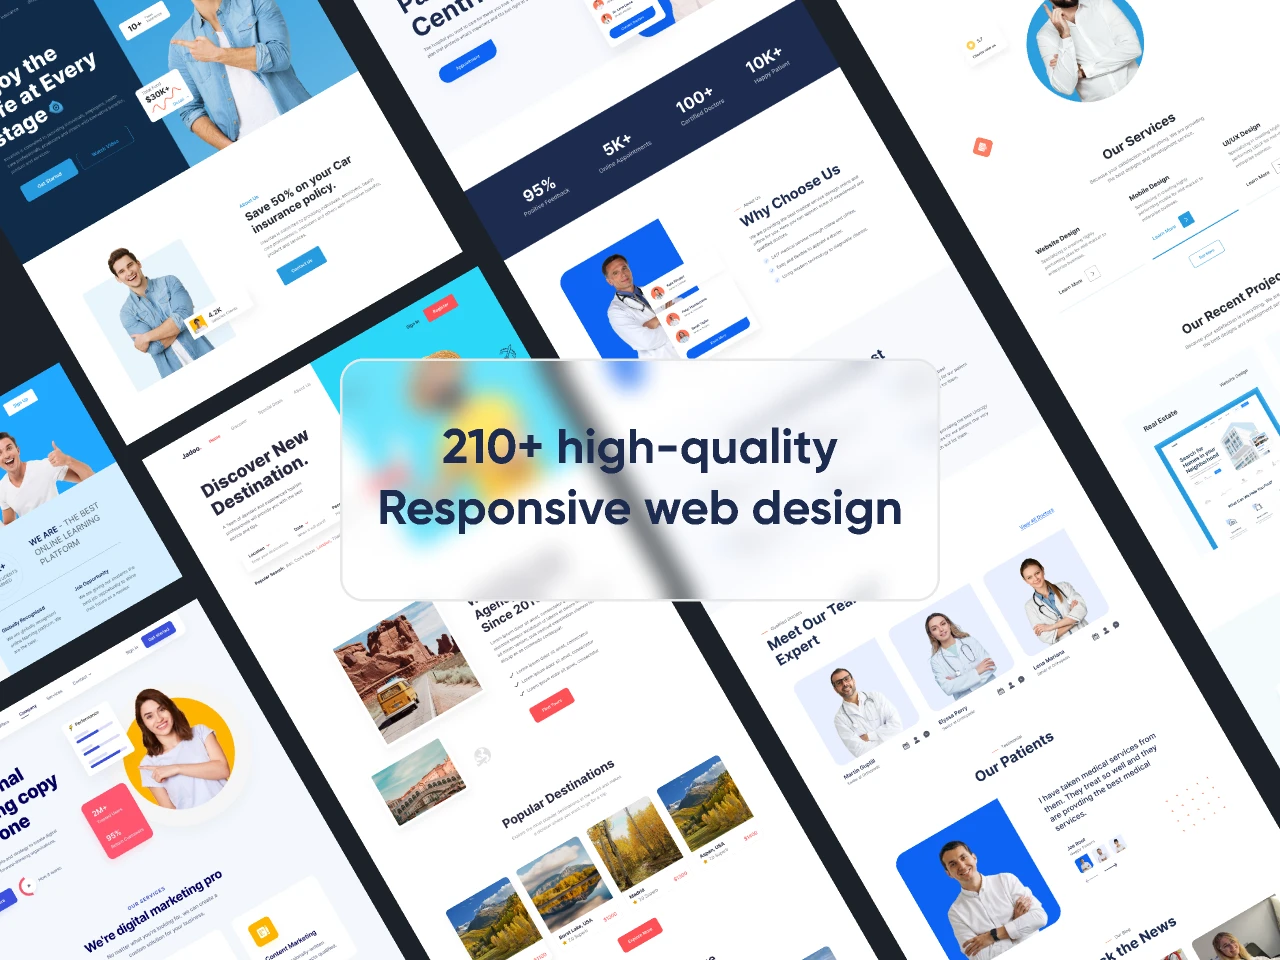 200+ High-quality responsive web design for Figma and Adobe XD